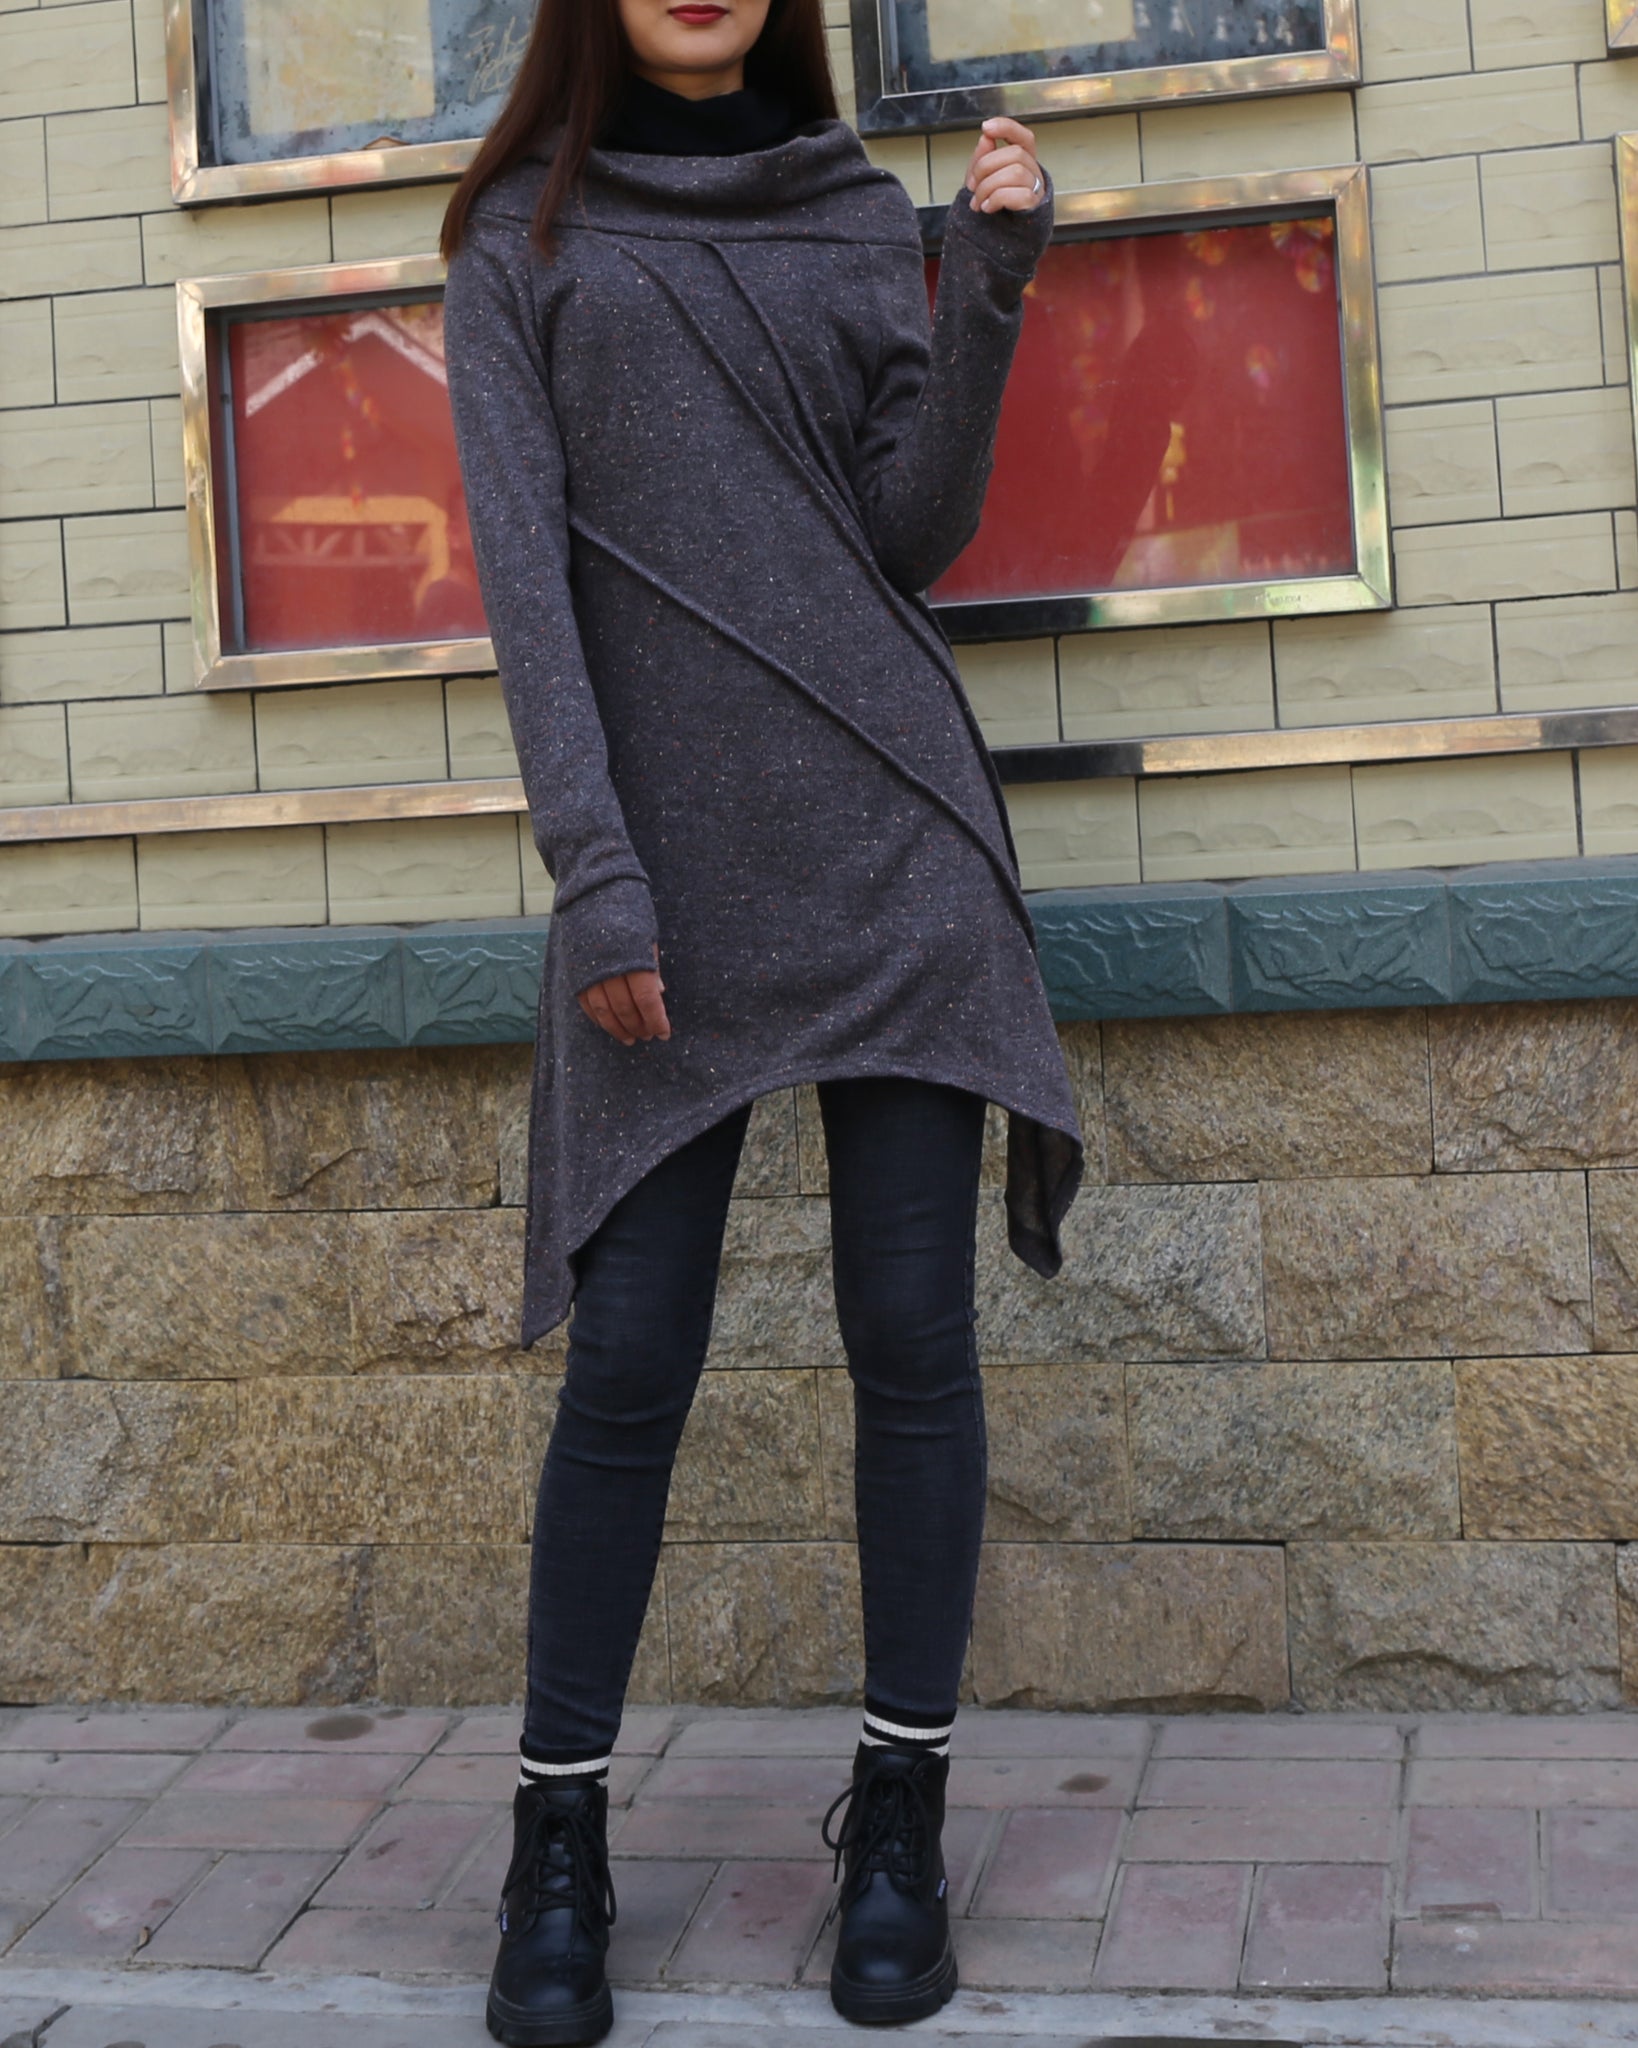 dressbarn - Tunic-length sweaters pair perfectly with leggings